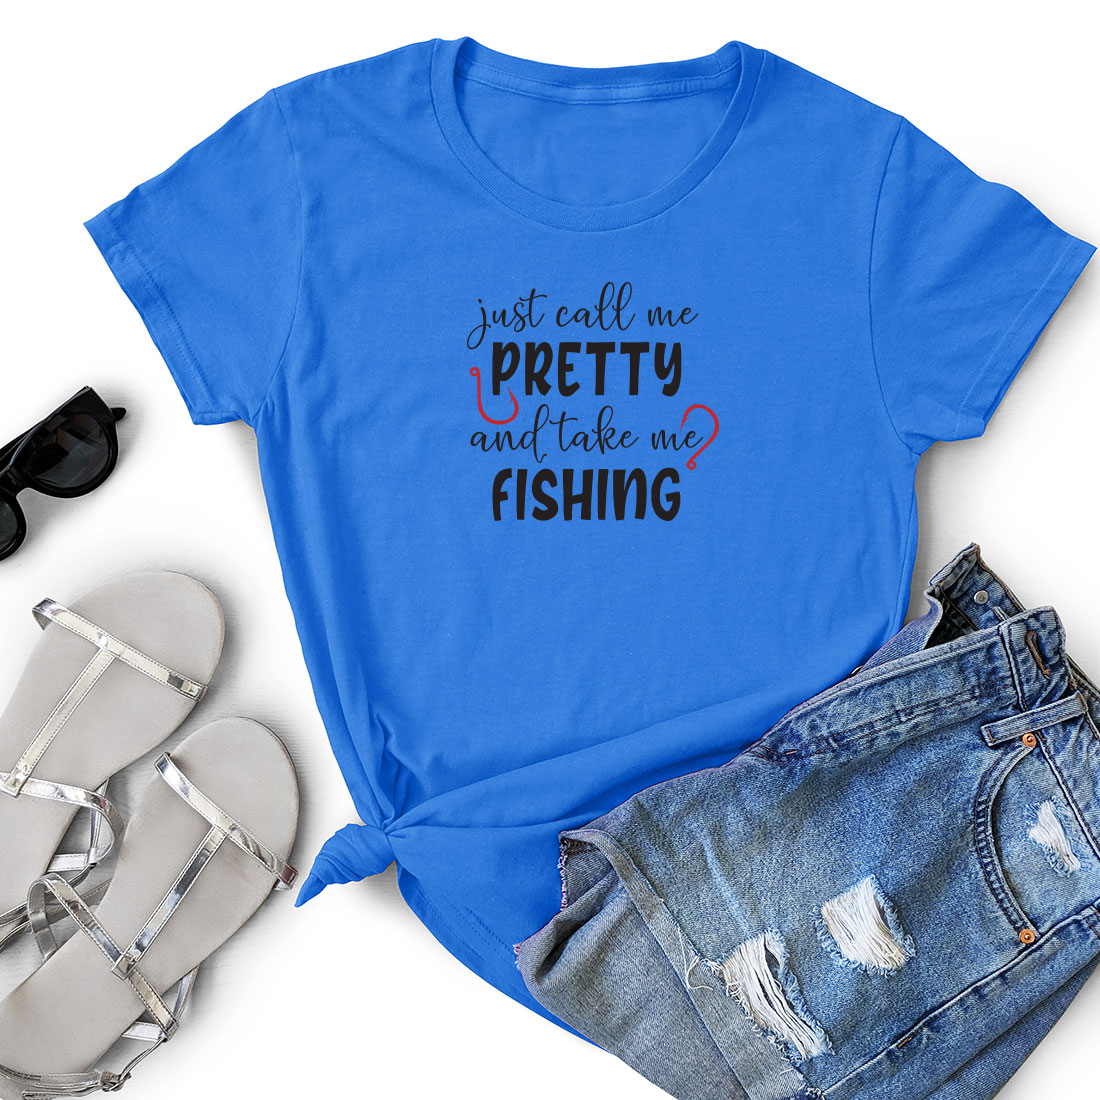 T - shirt that says just call me pretty and take me fishing.